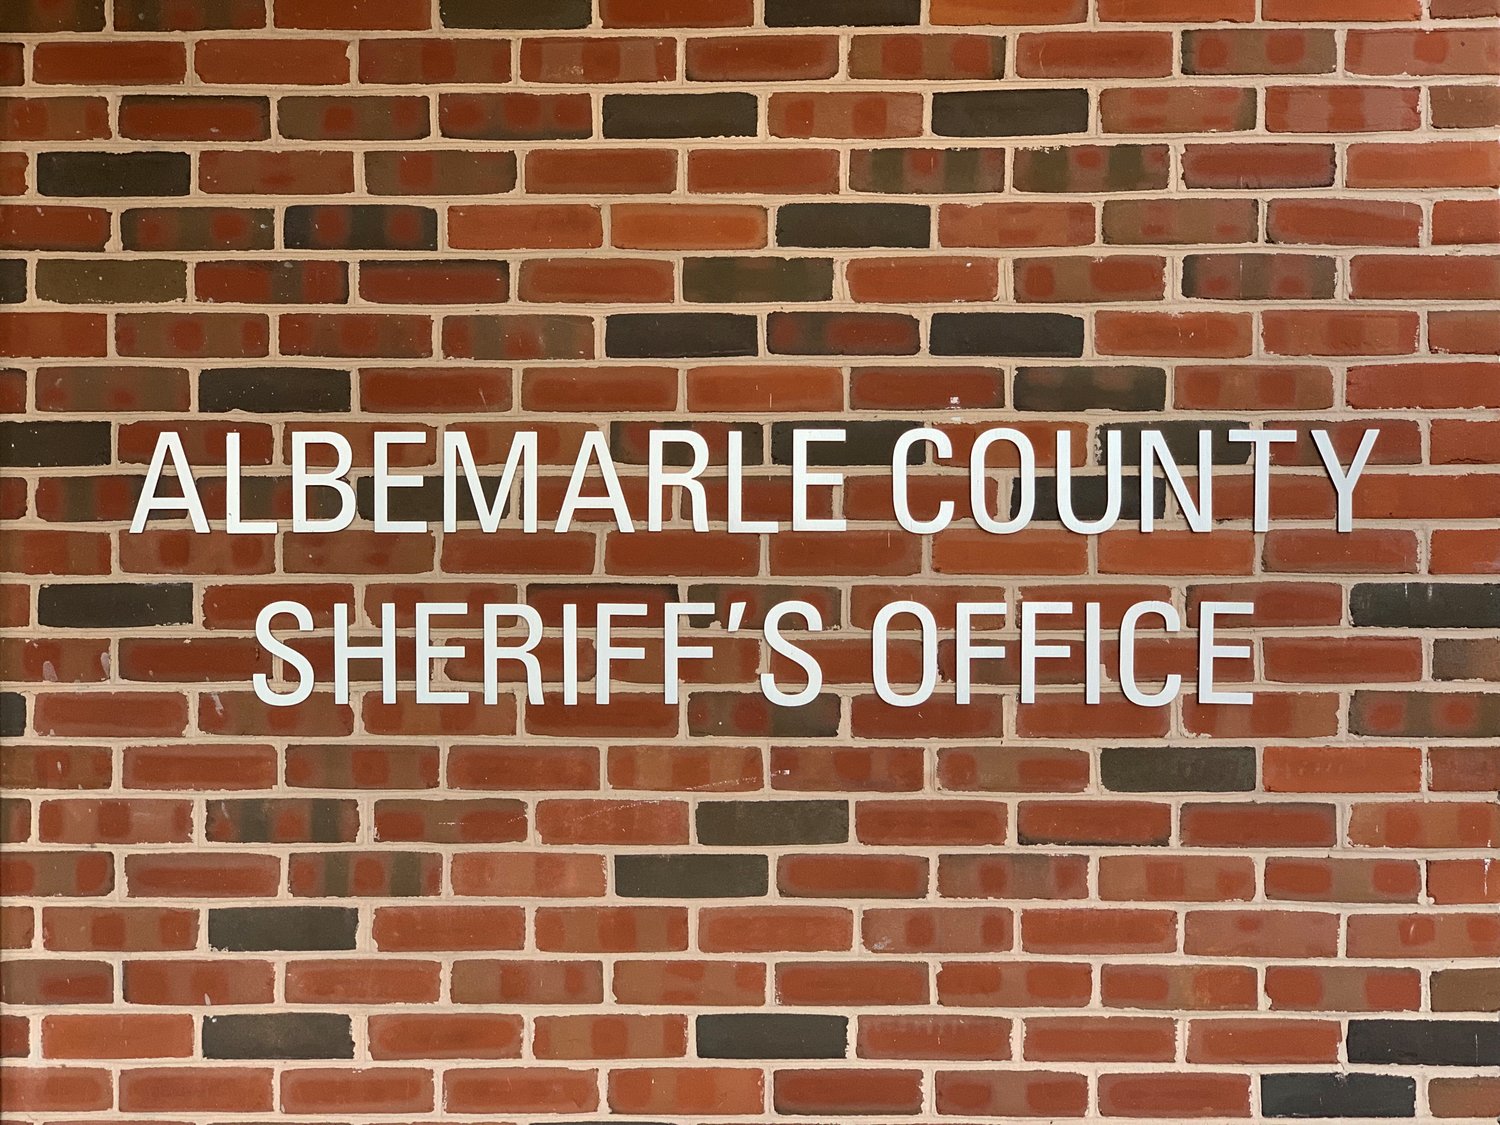 Image of Albemarle County Sheriffs Office